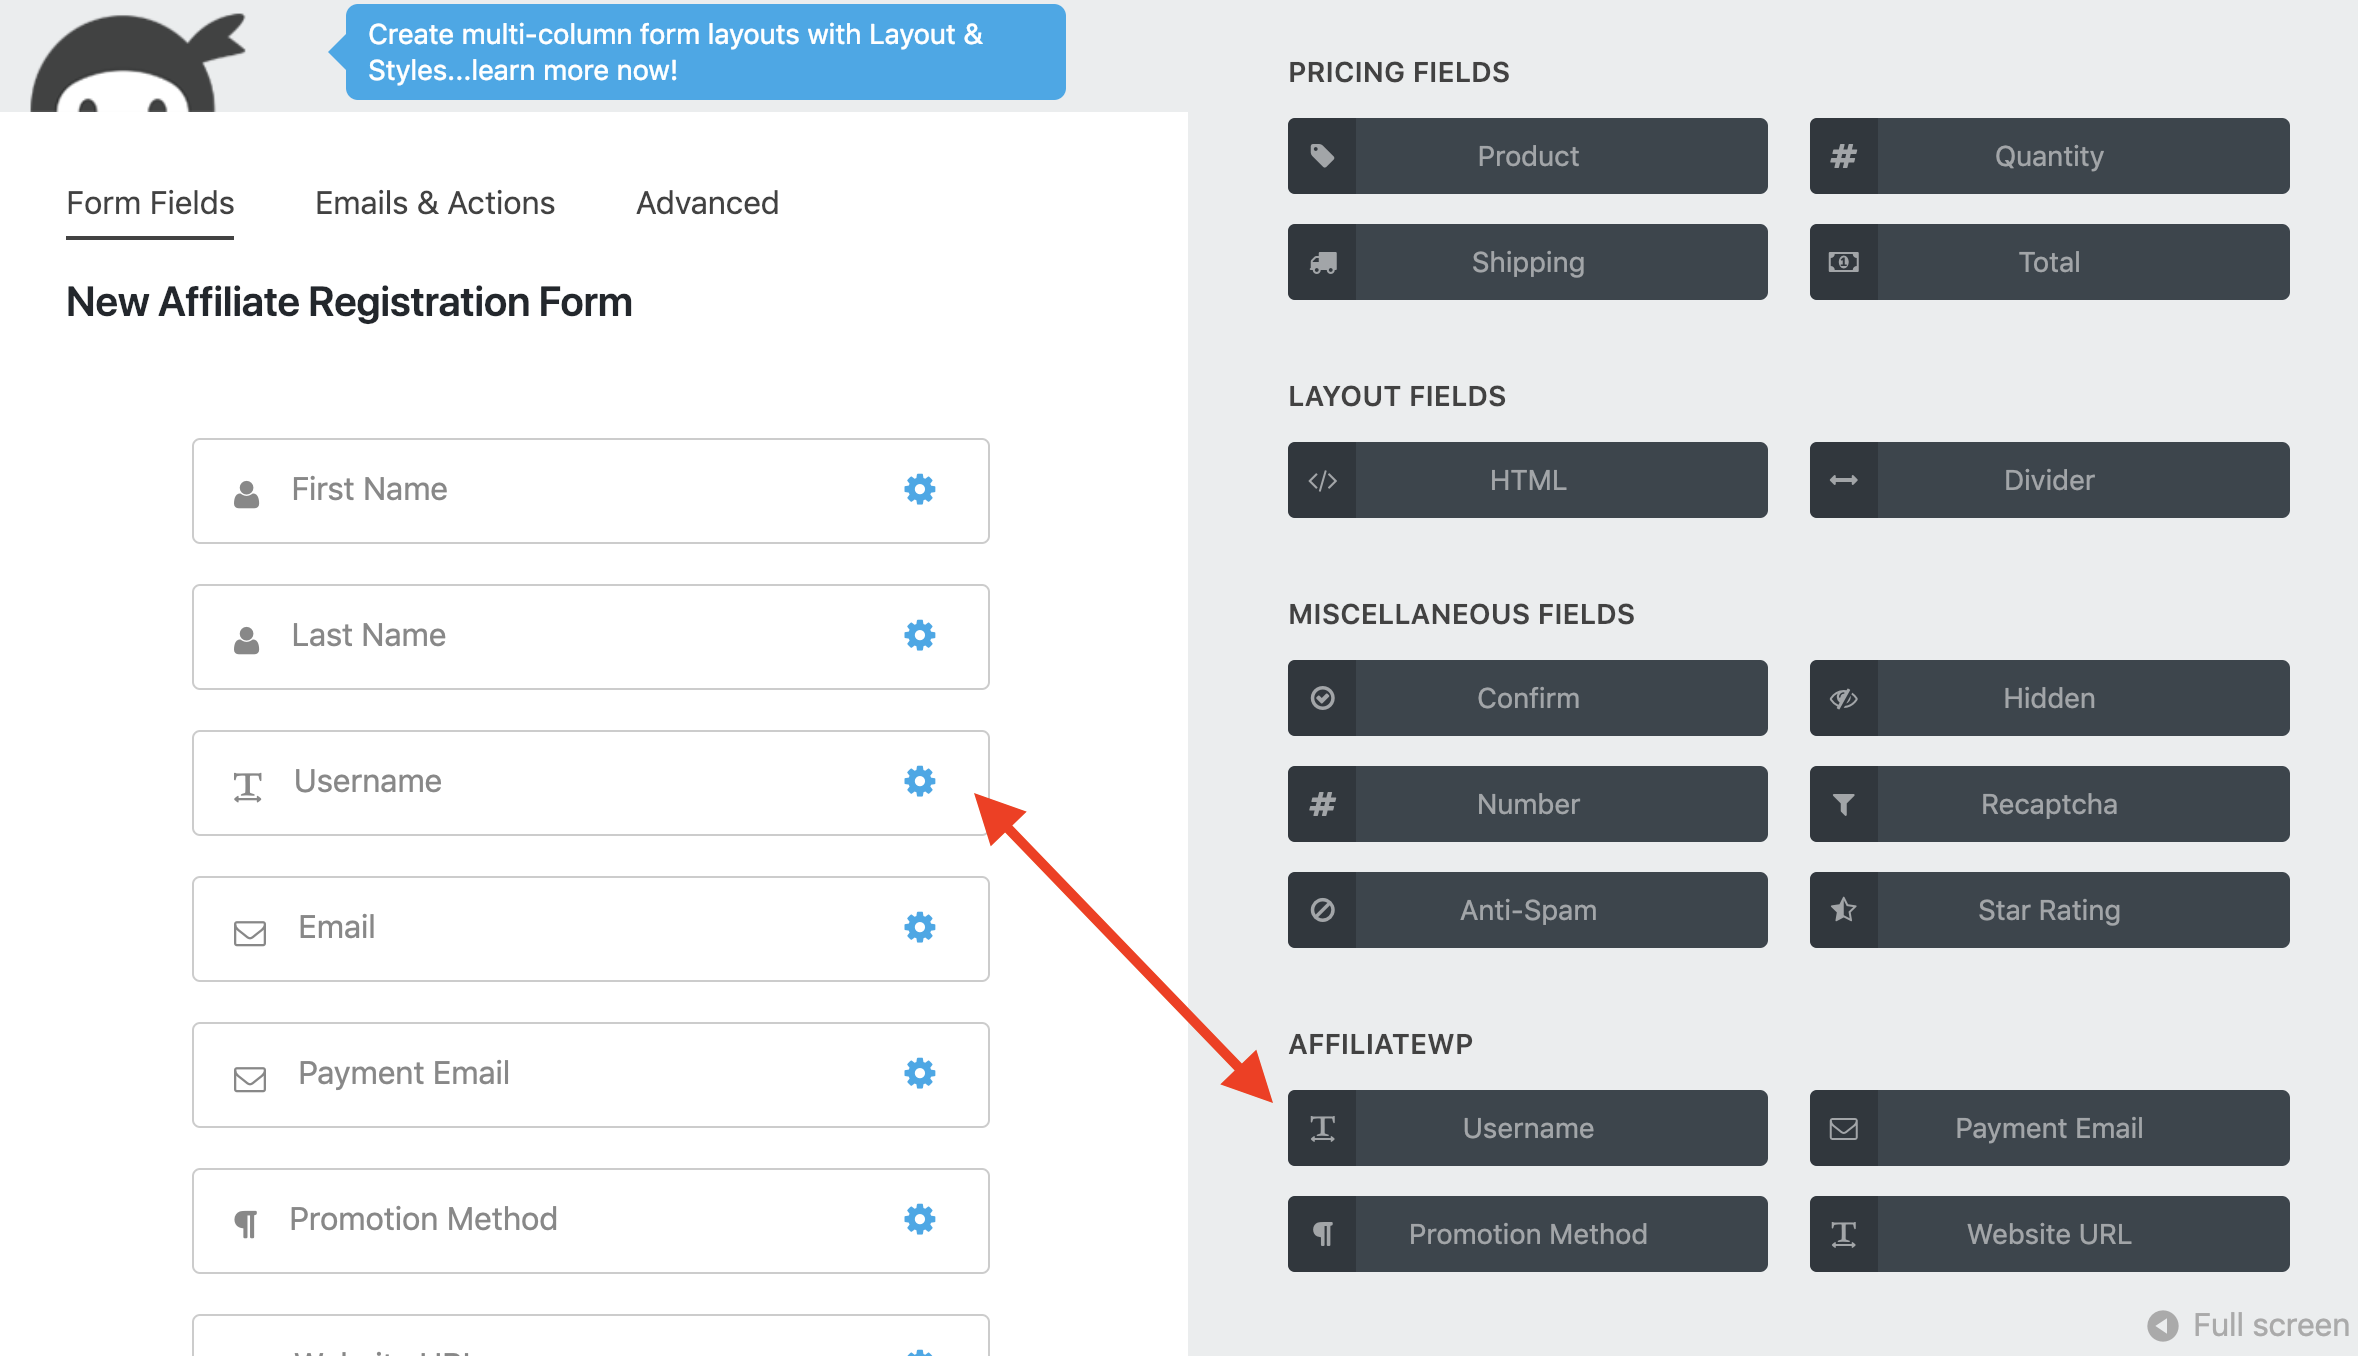 Use the Username field from the AffiliateWP section